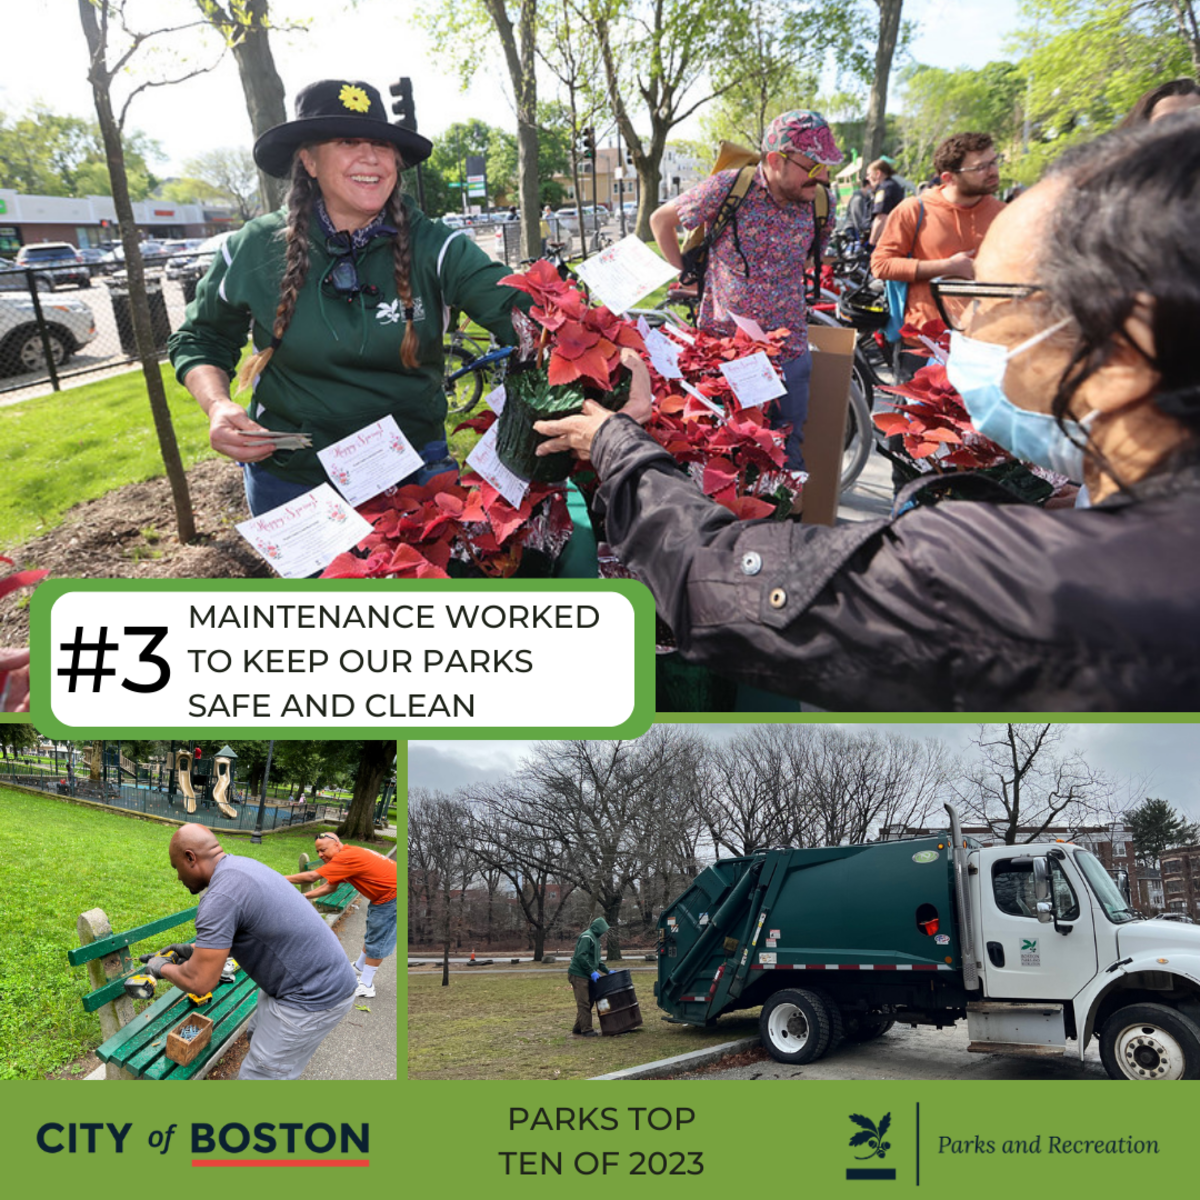 3. MAINTENANCE WORKED TO KEEP OUR PARKS SAFE AND CLEAN. Greenhouse worker handing out flowers, fixing a bench, trash truck.